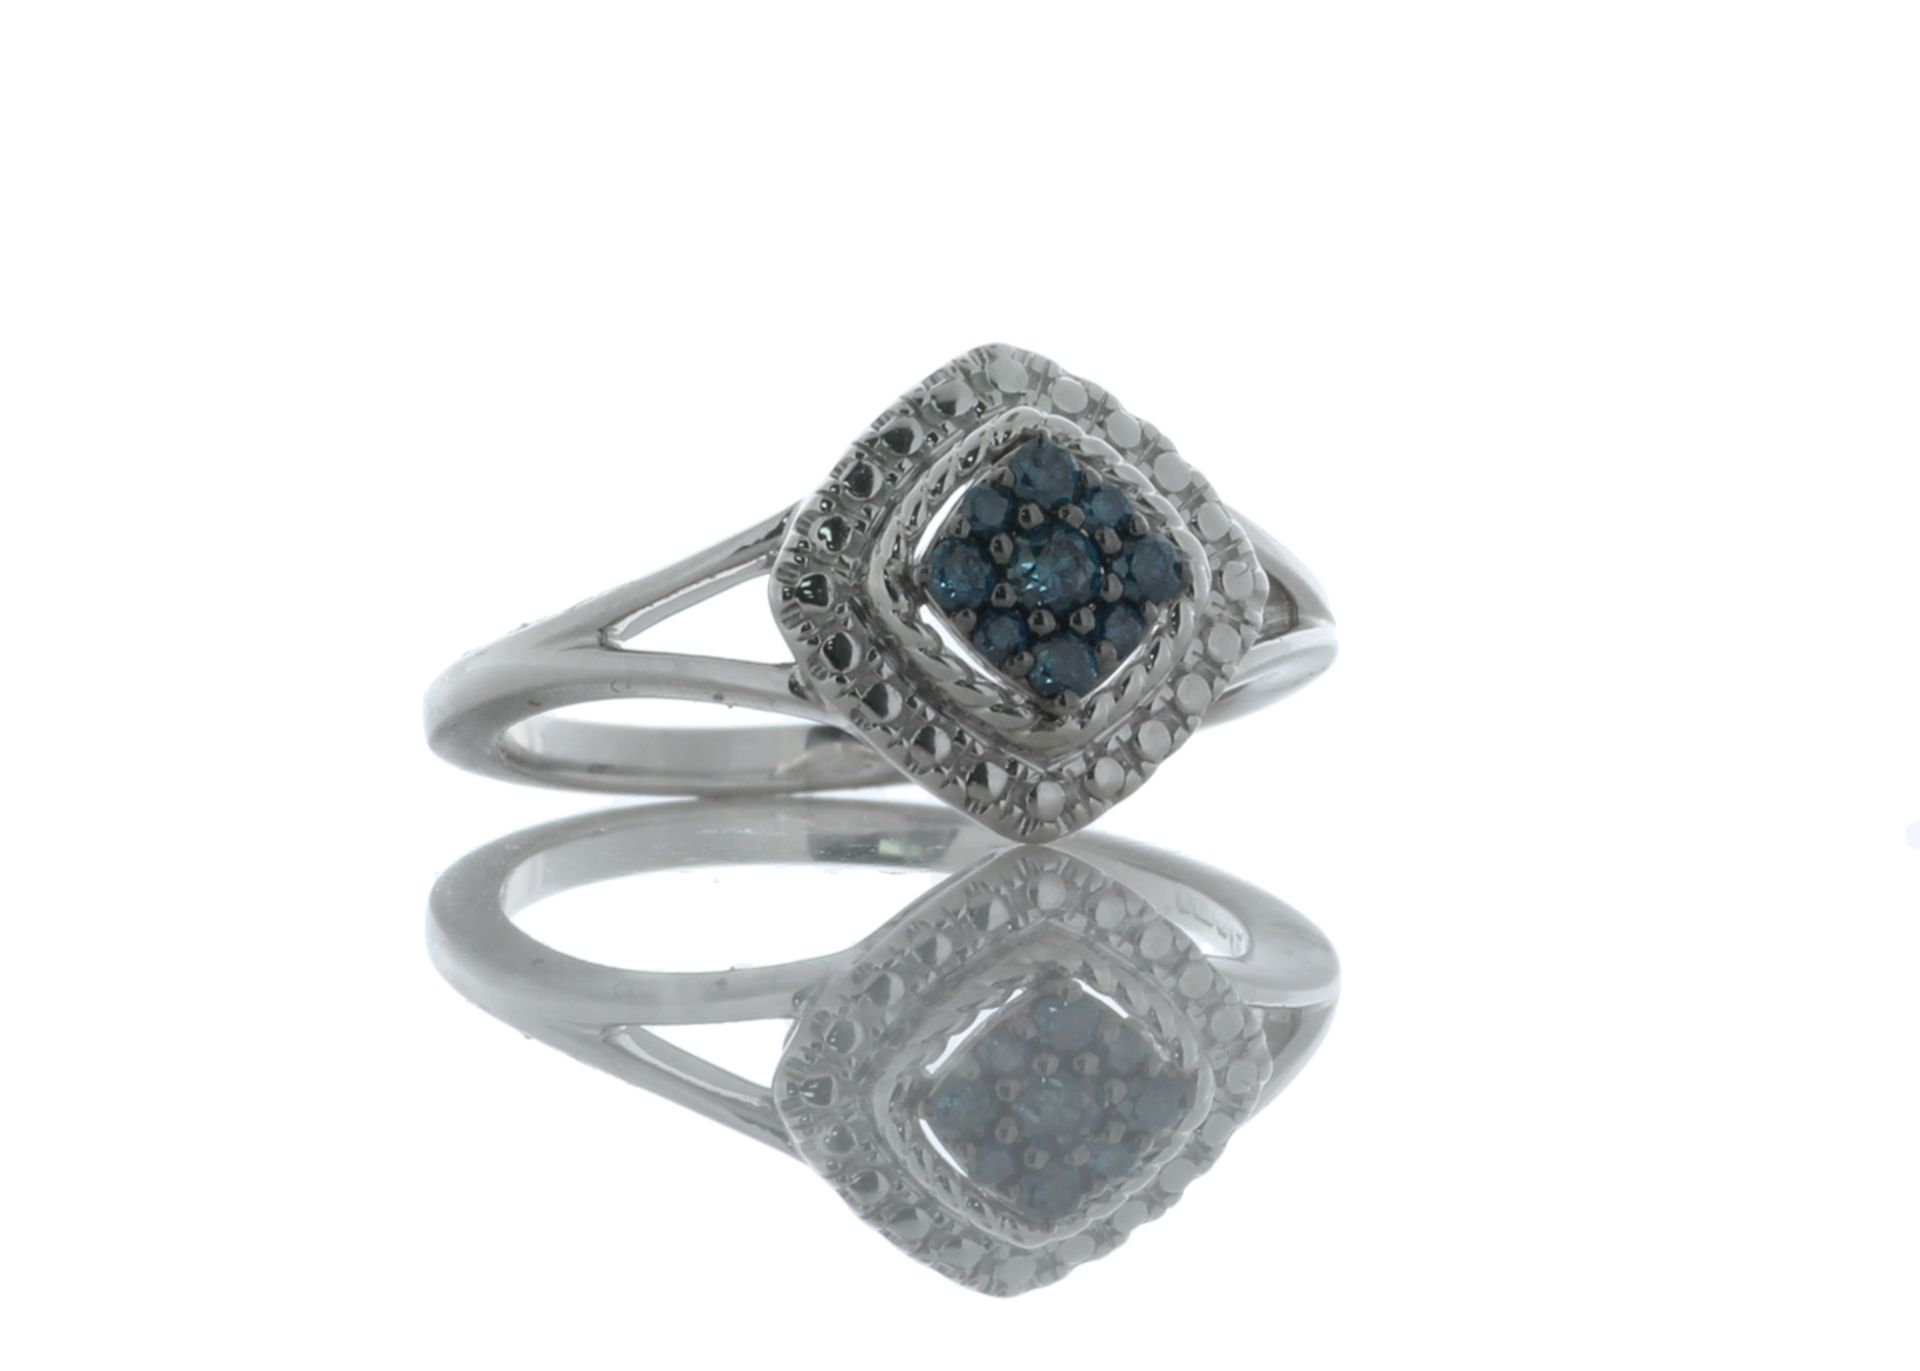 9ct White Gold Diamond Ring 0.15 Carats - Valued By GIE £3,475.00 - Nine Round brilliant blue - Image 4 of 5